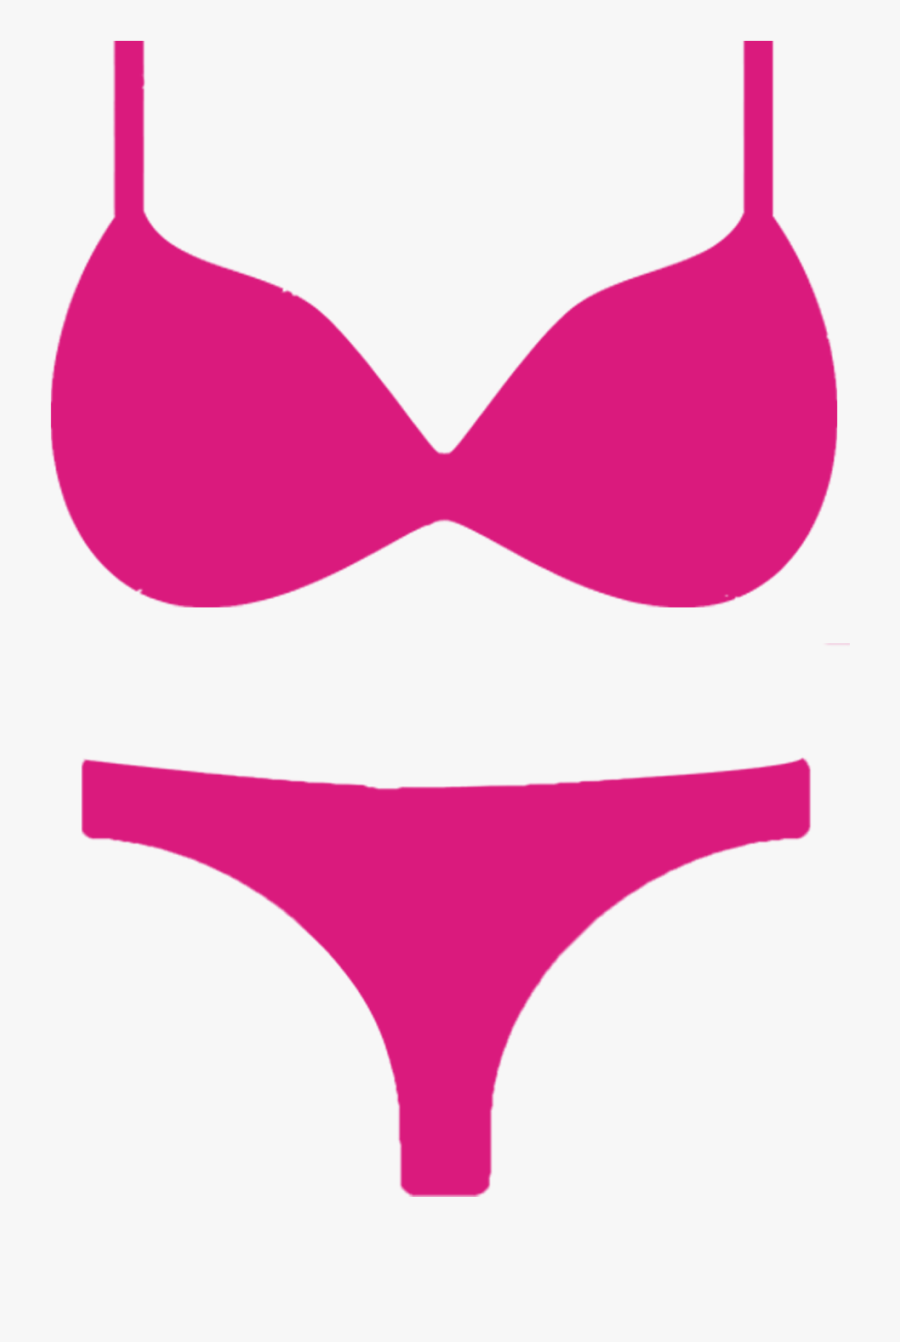 Red Rose Garments Slips - Bra And Panty Png, Transparent Clipart